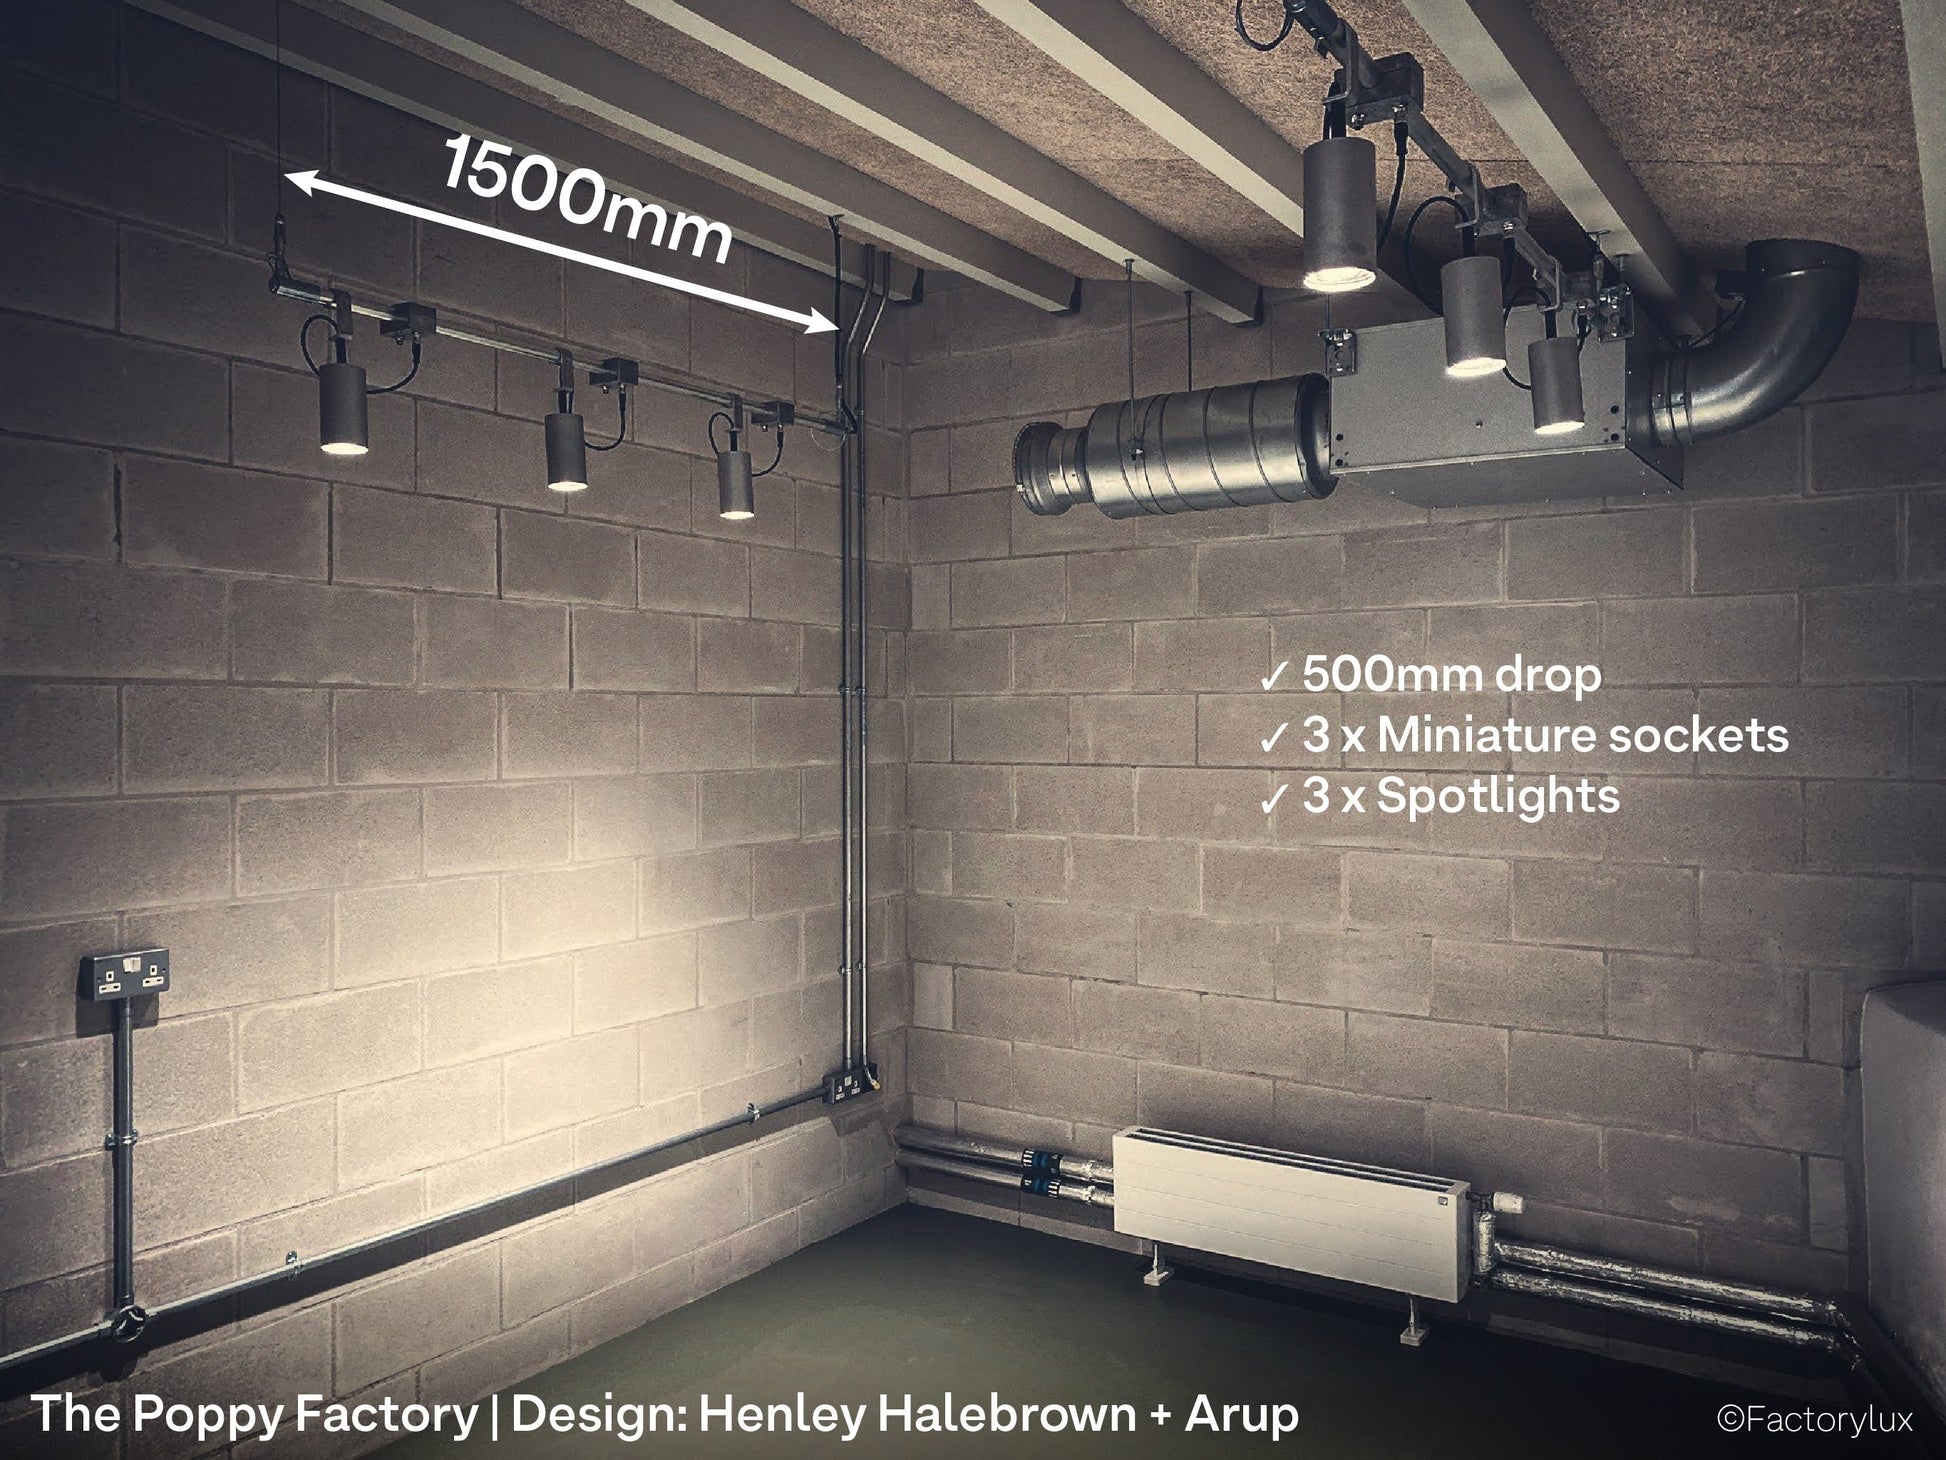 Exposed concrete block walls at Poppy Factory, Richmond, annotated with length and drop of lighting track and spotlights